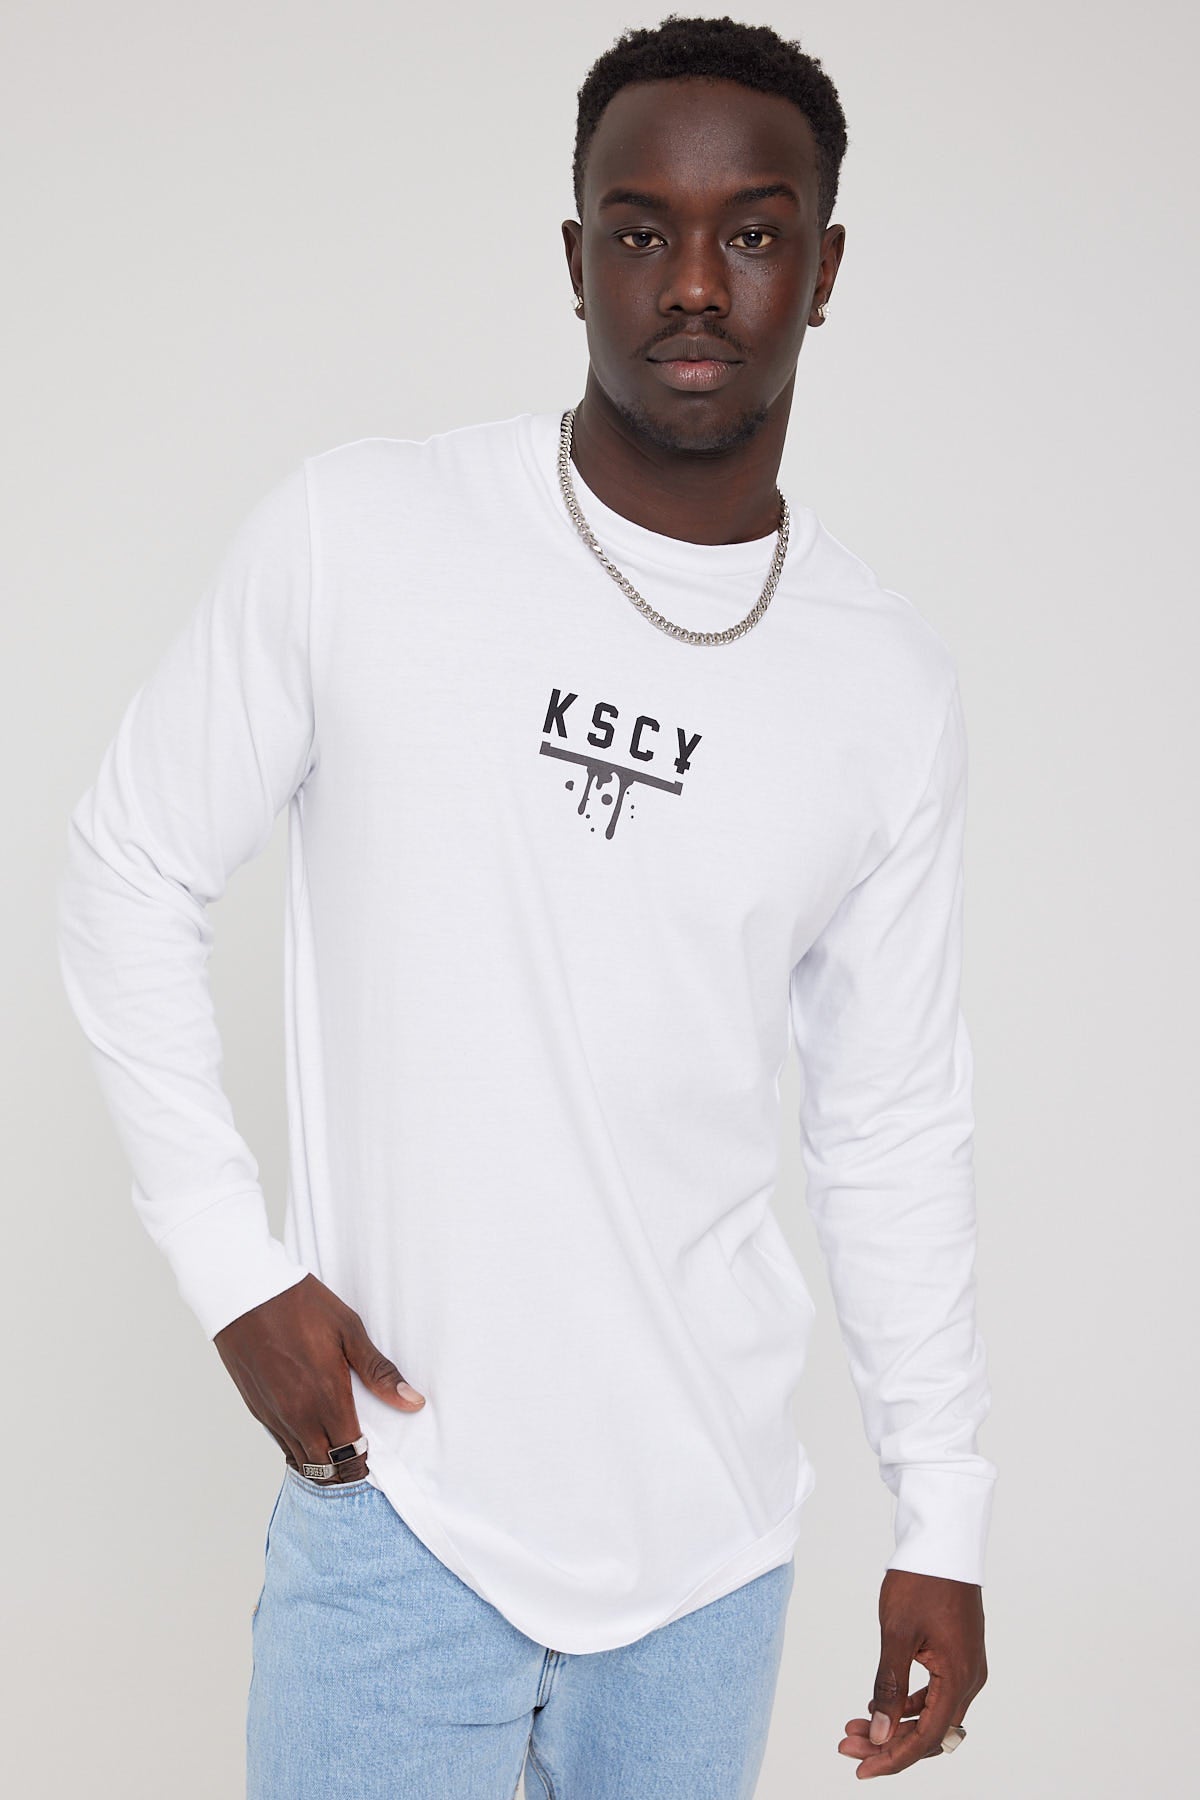 Kiss Chacey Summit Dual Curved L/S Tee White